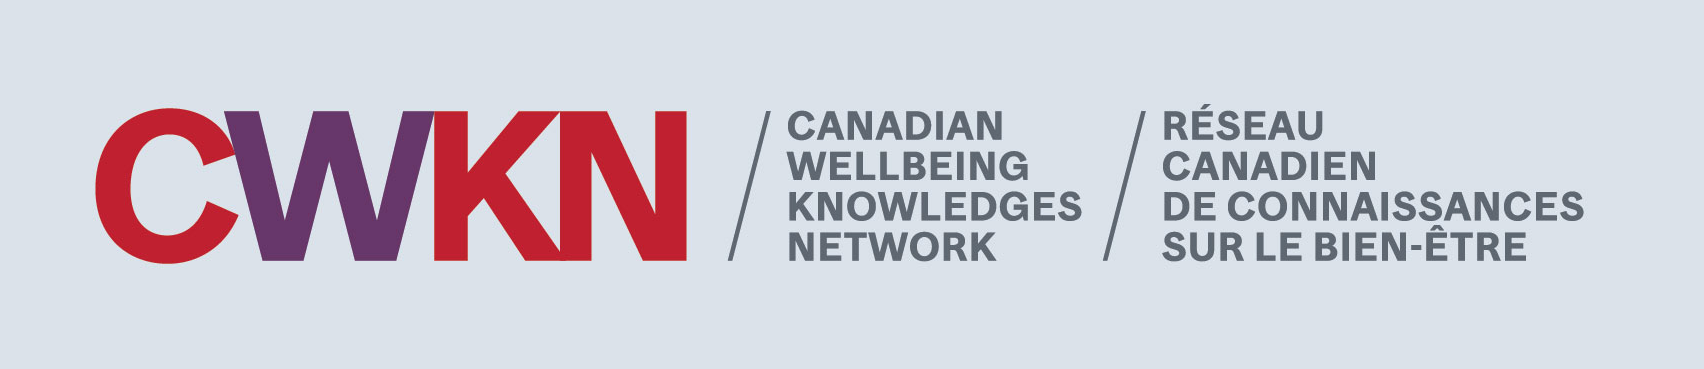 The Canadian Wellbeing Knowledges Network (CWKN) 